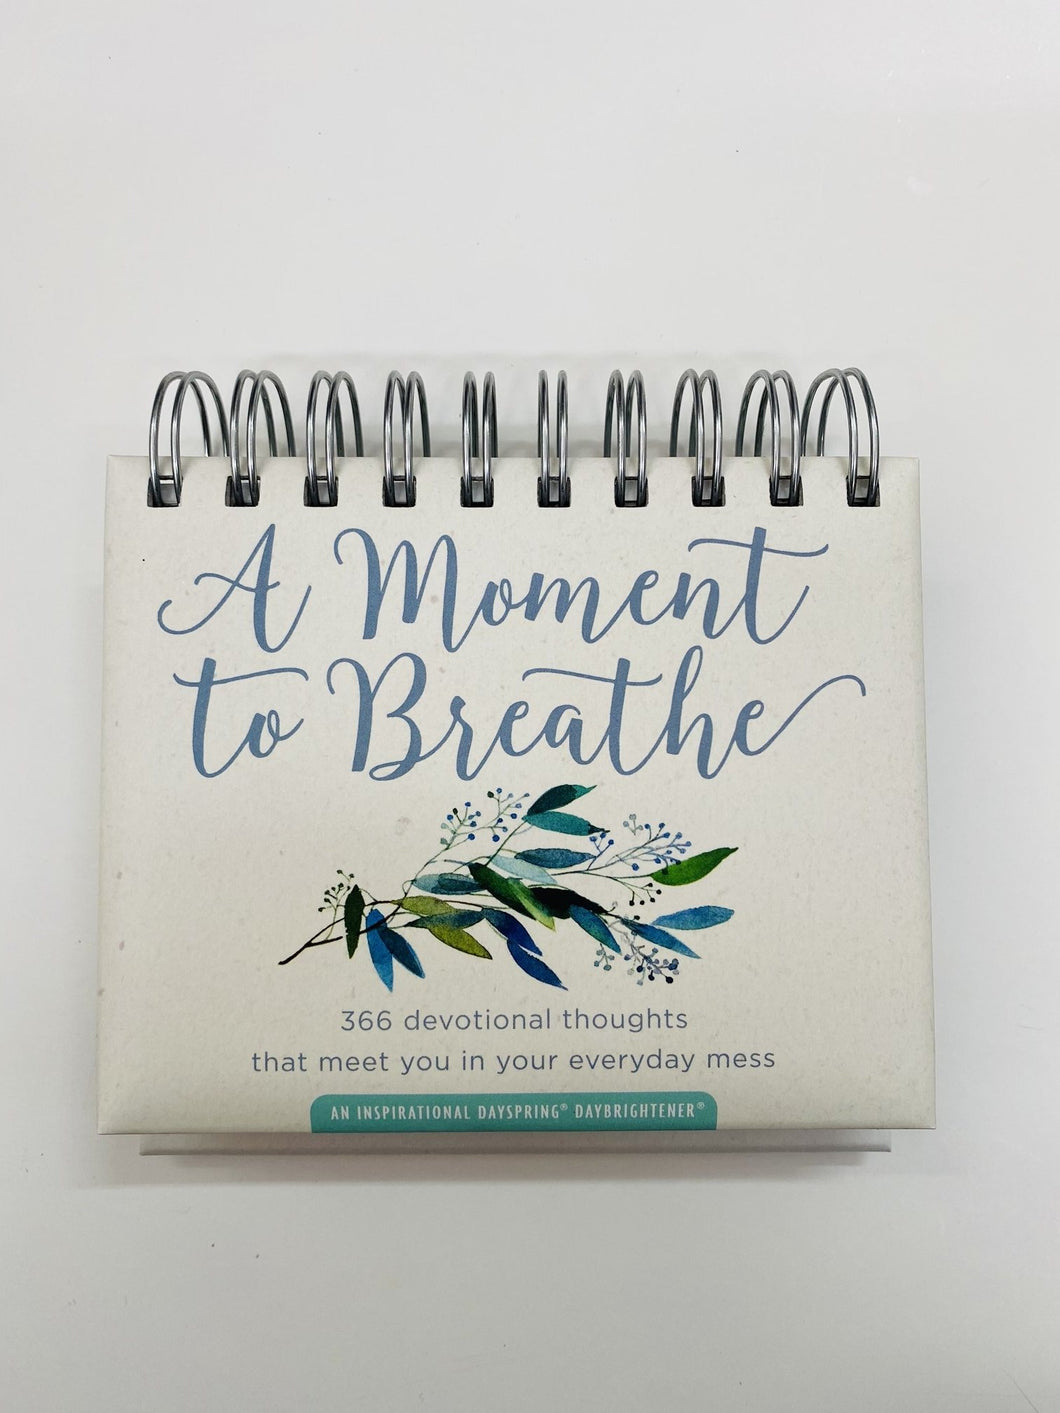 Day brightener: A Moment to Breathe